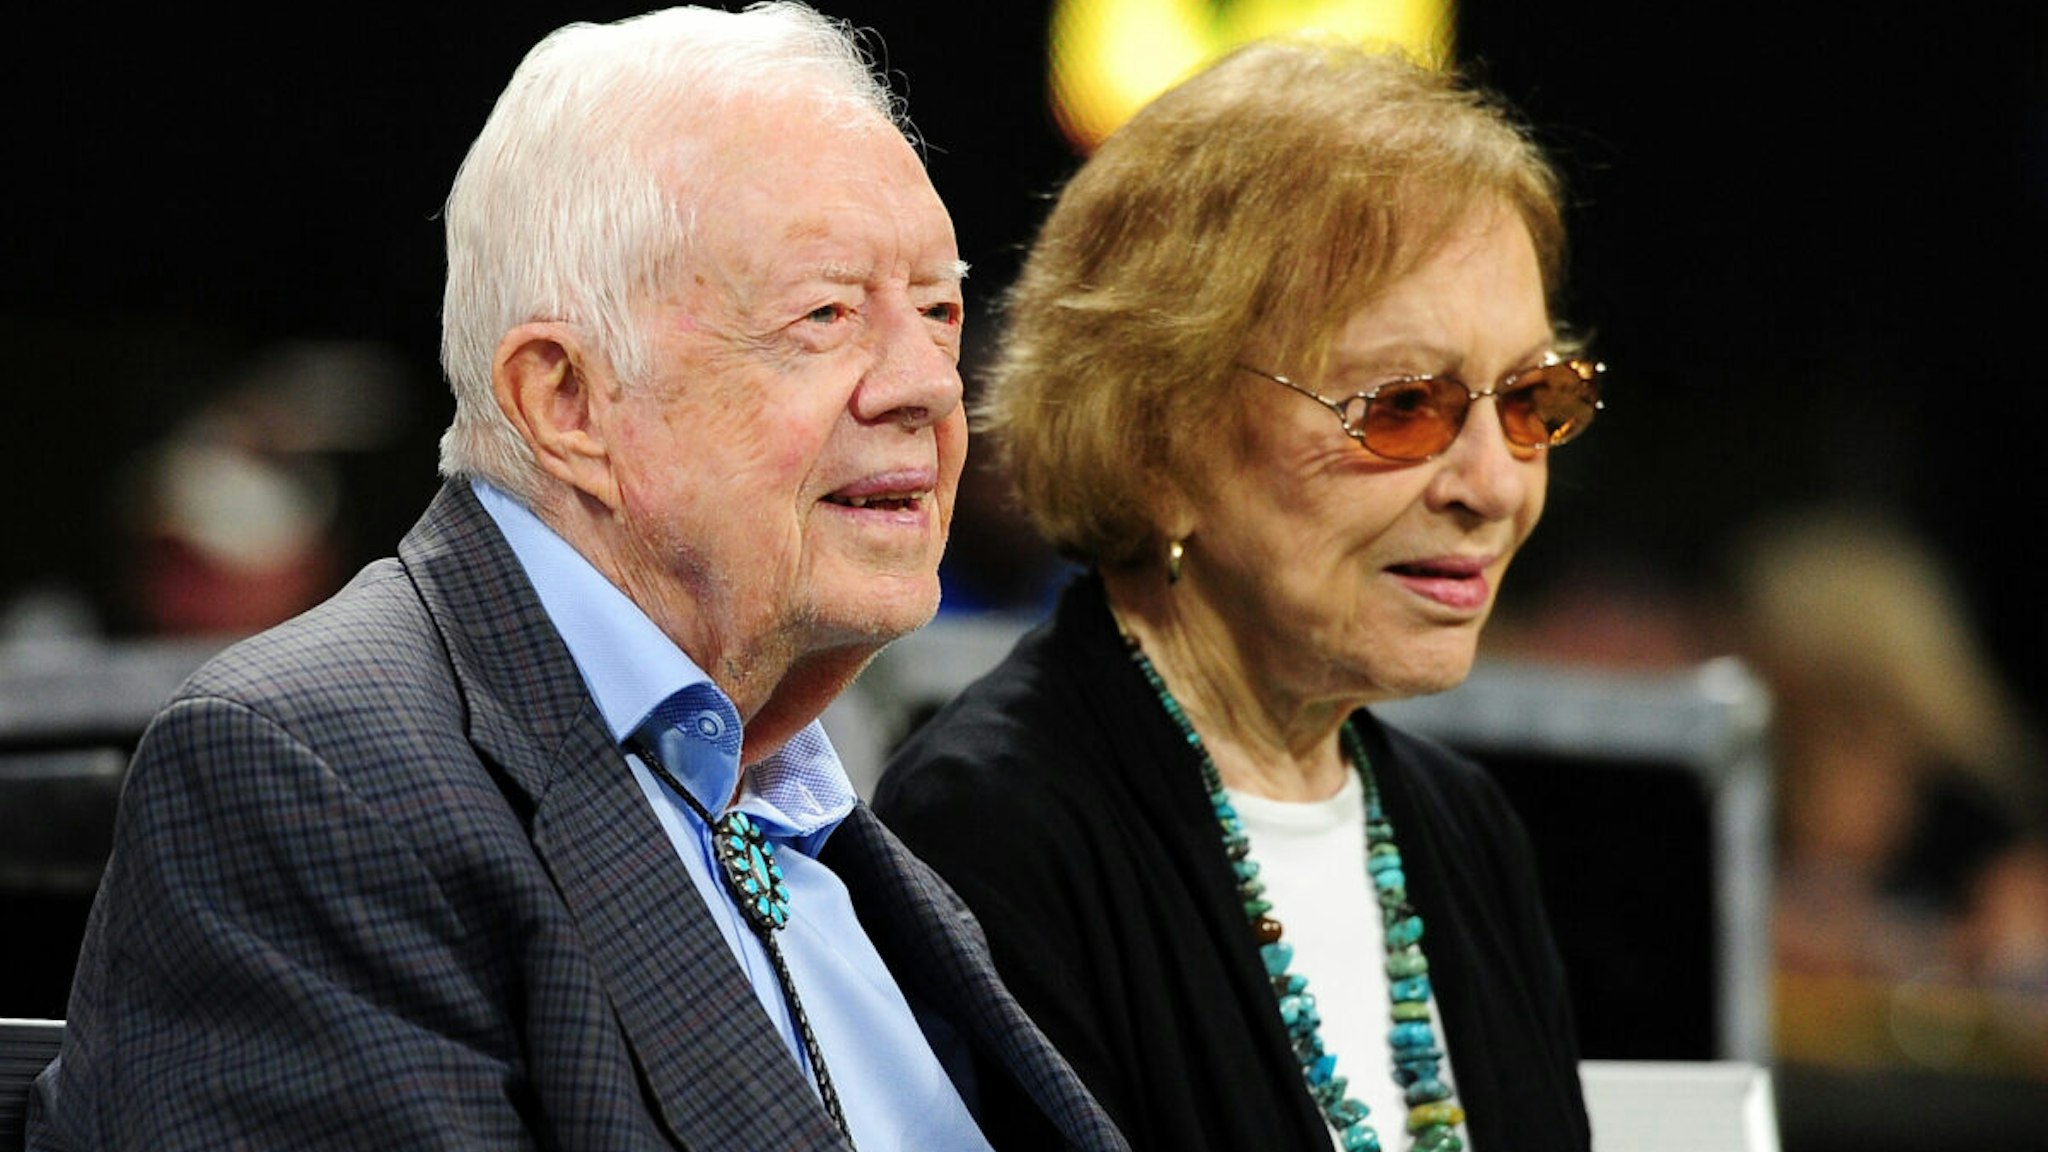 Former president Jimmy Carter and his wife Rosalynn prior to the game between the Atlanta Falcons and the Cincinnati Bengals at Mercedes-Benz Stadium on September 30, 2018 in Atlanta, Georgia.